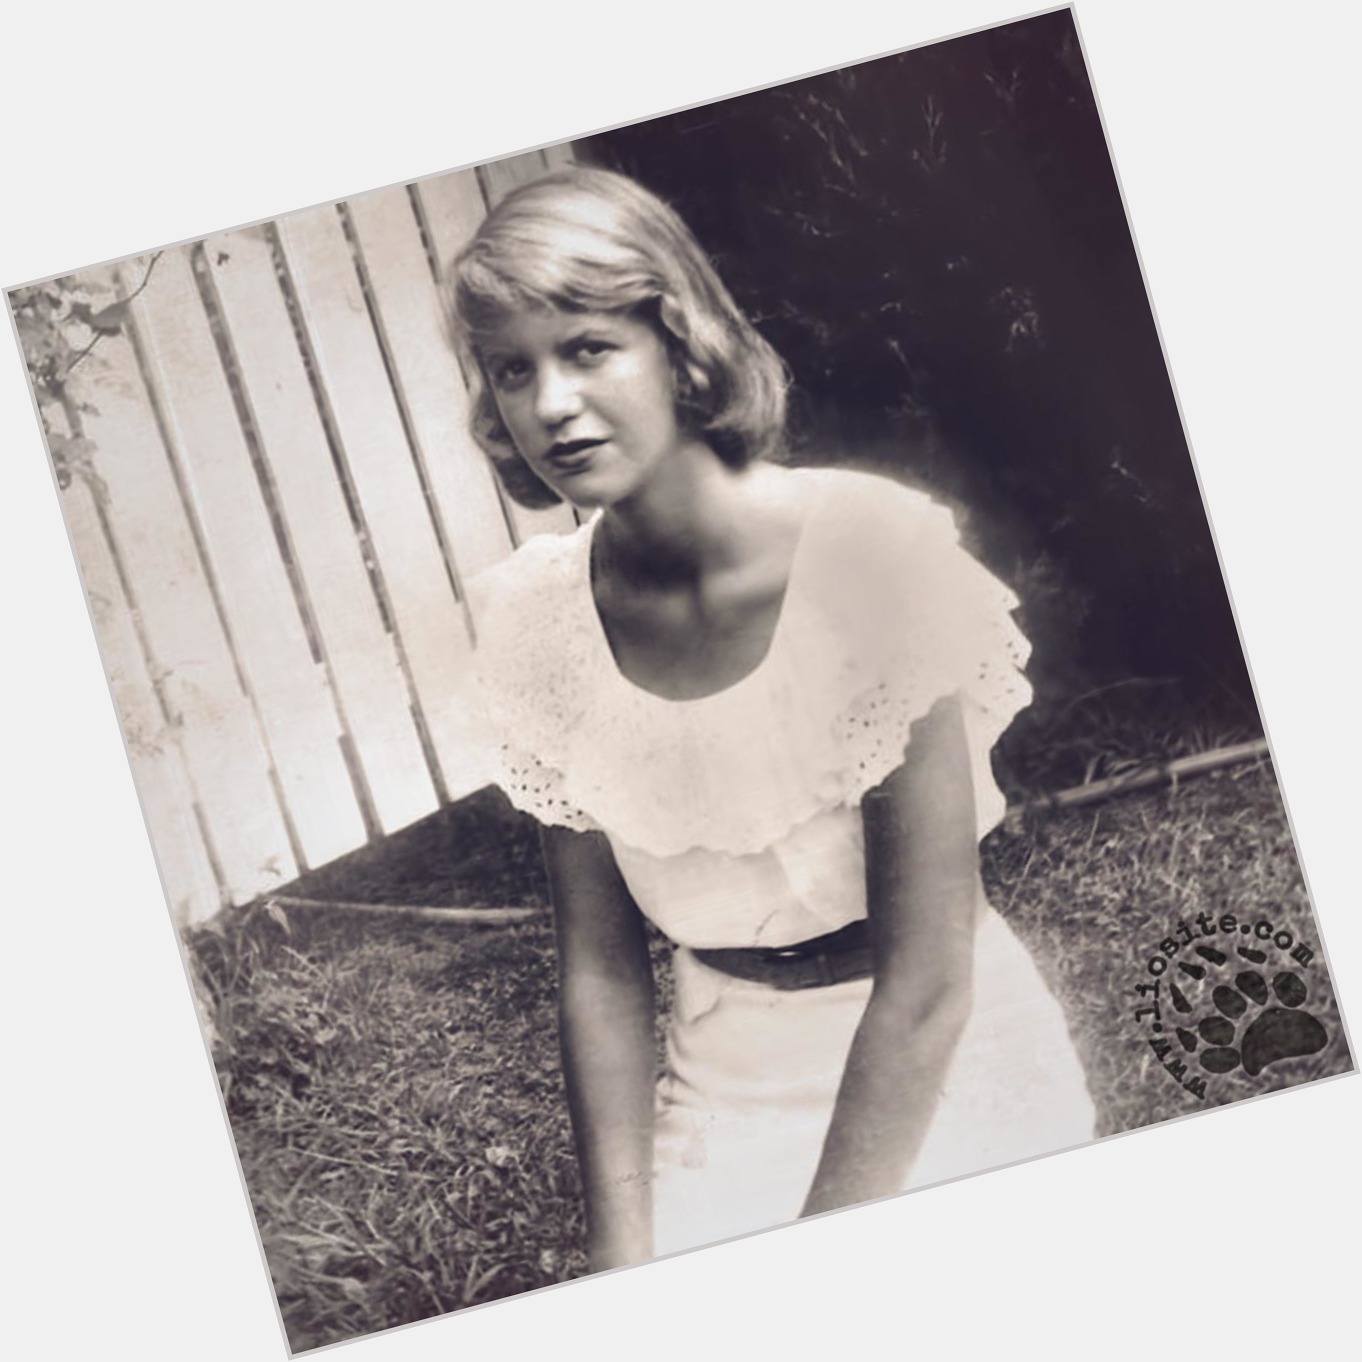  I desire the things which will destroy me in the end. Happy birthday, the blazing Sylvia Plath ... 